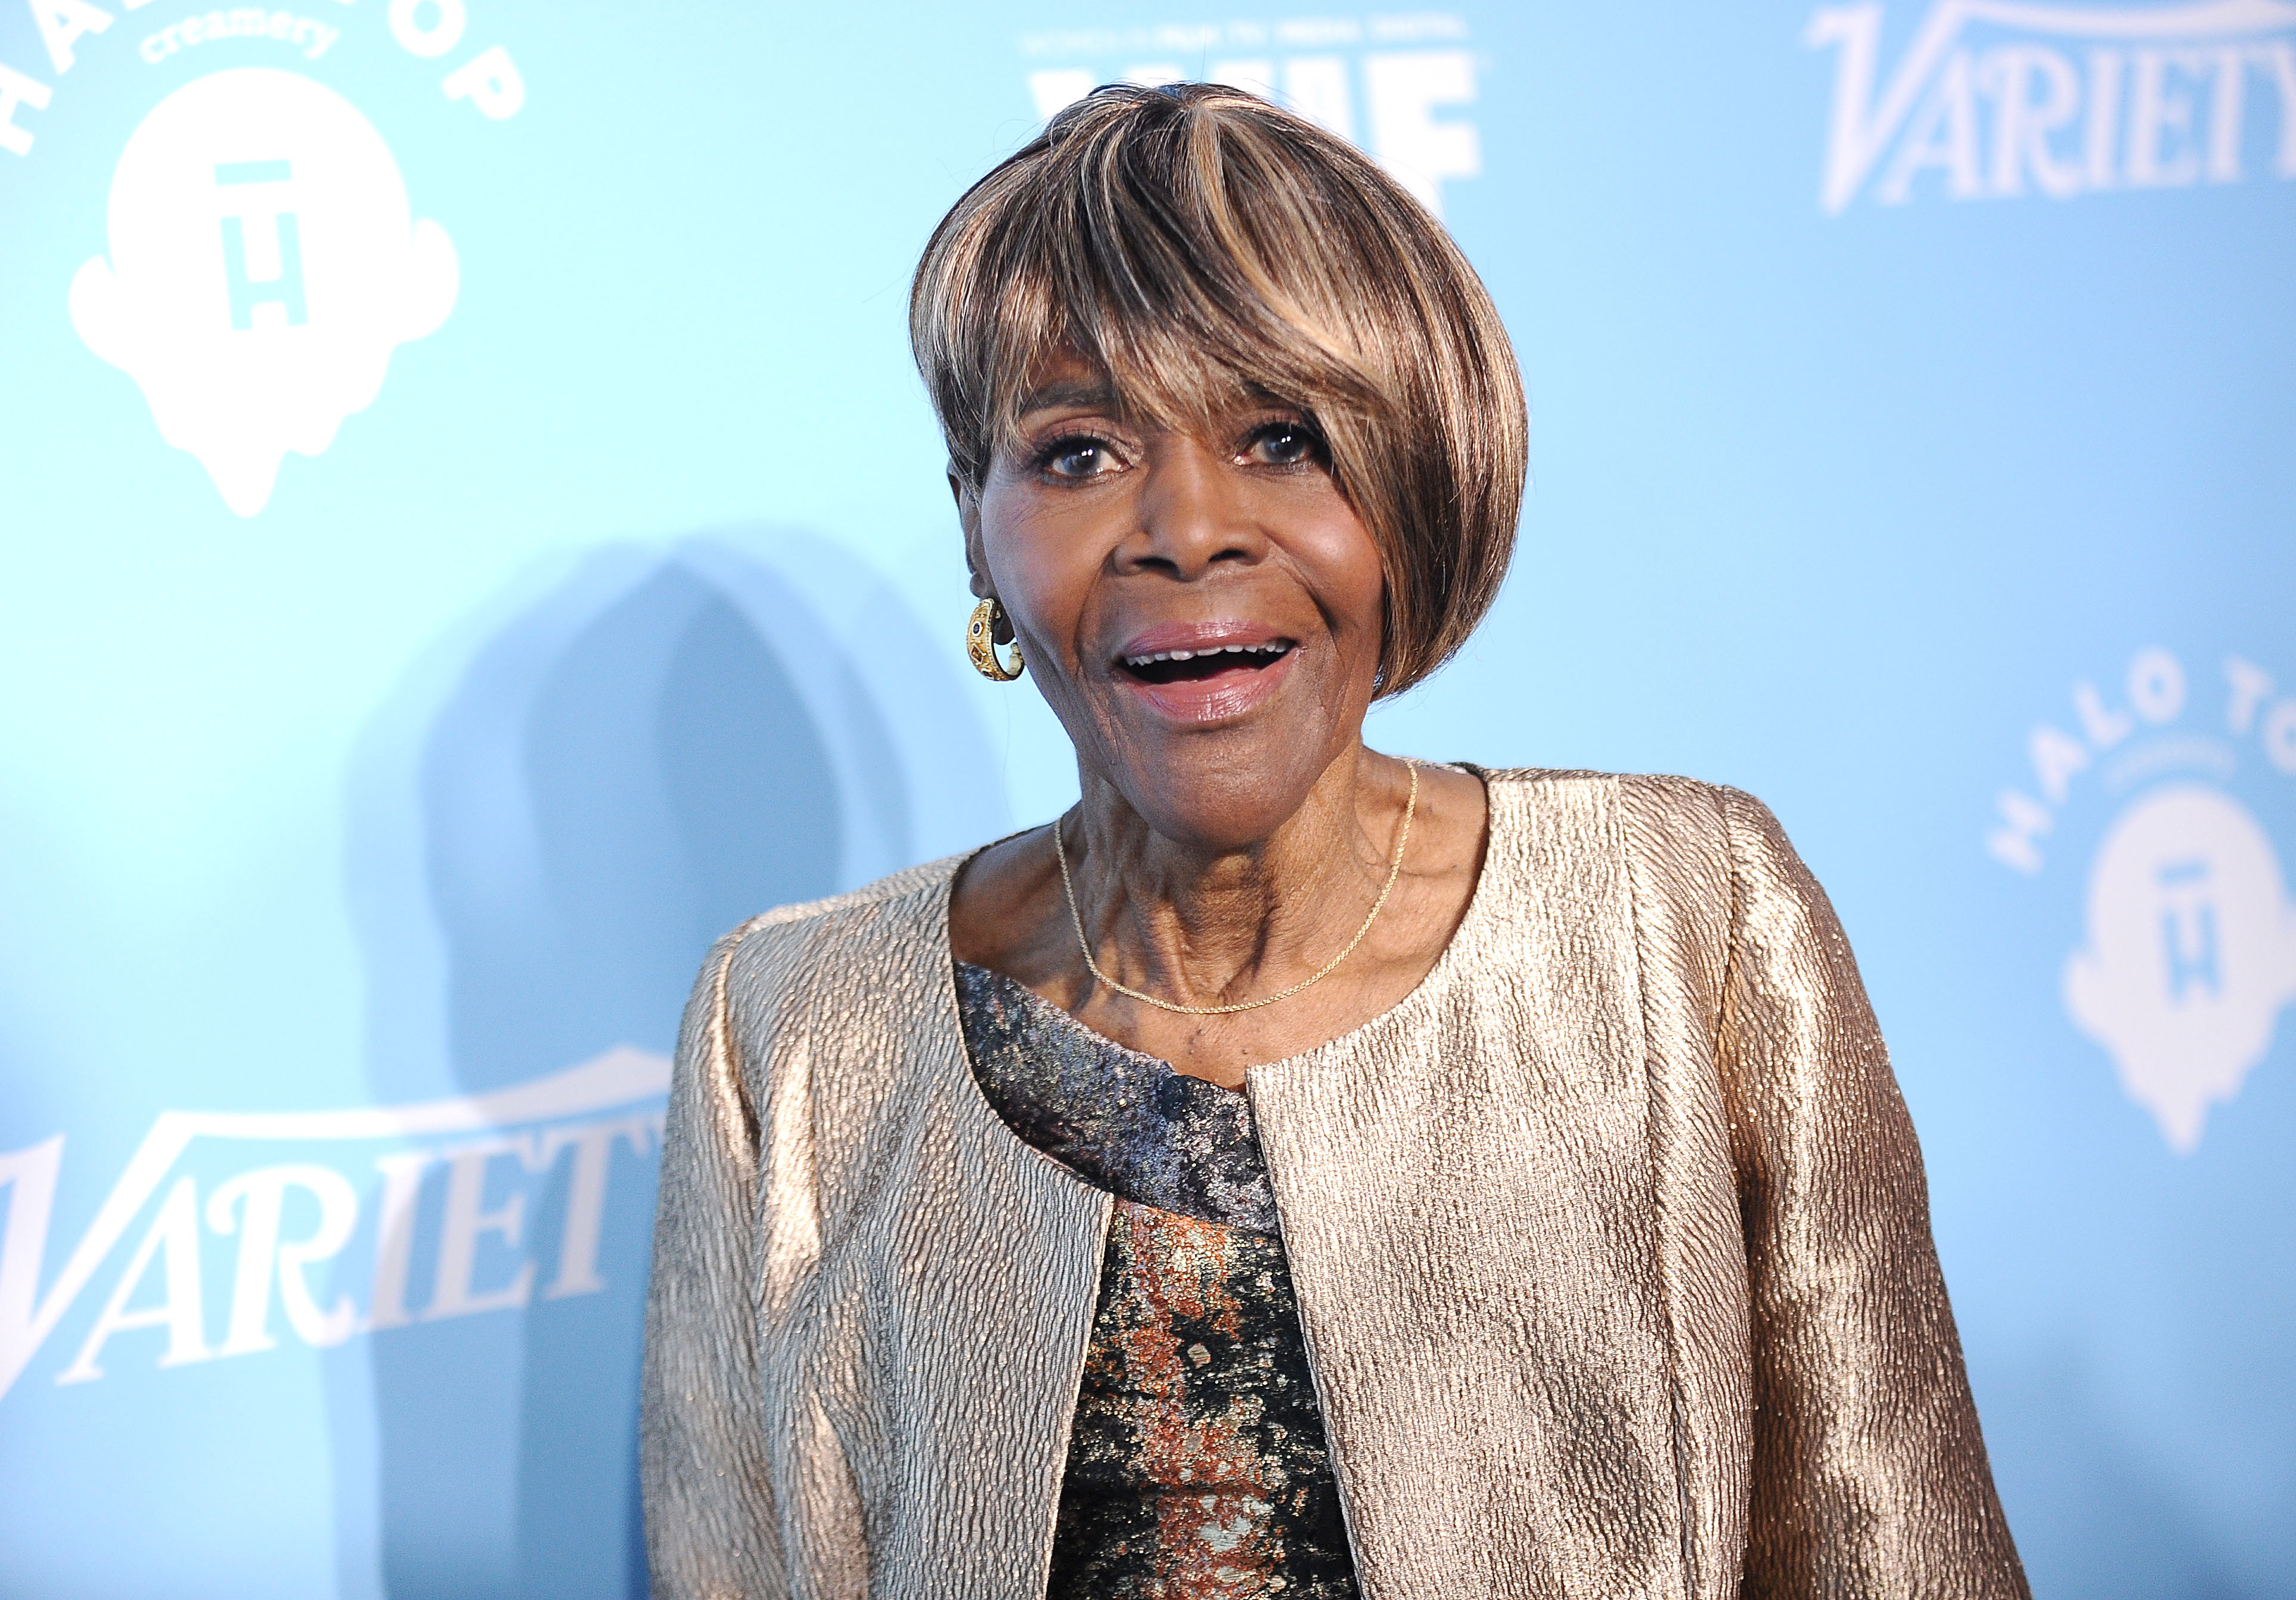 Cicely Tyson wearing a silver jacket.